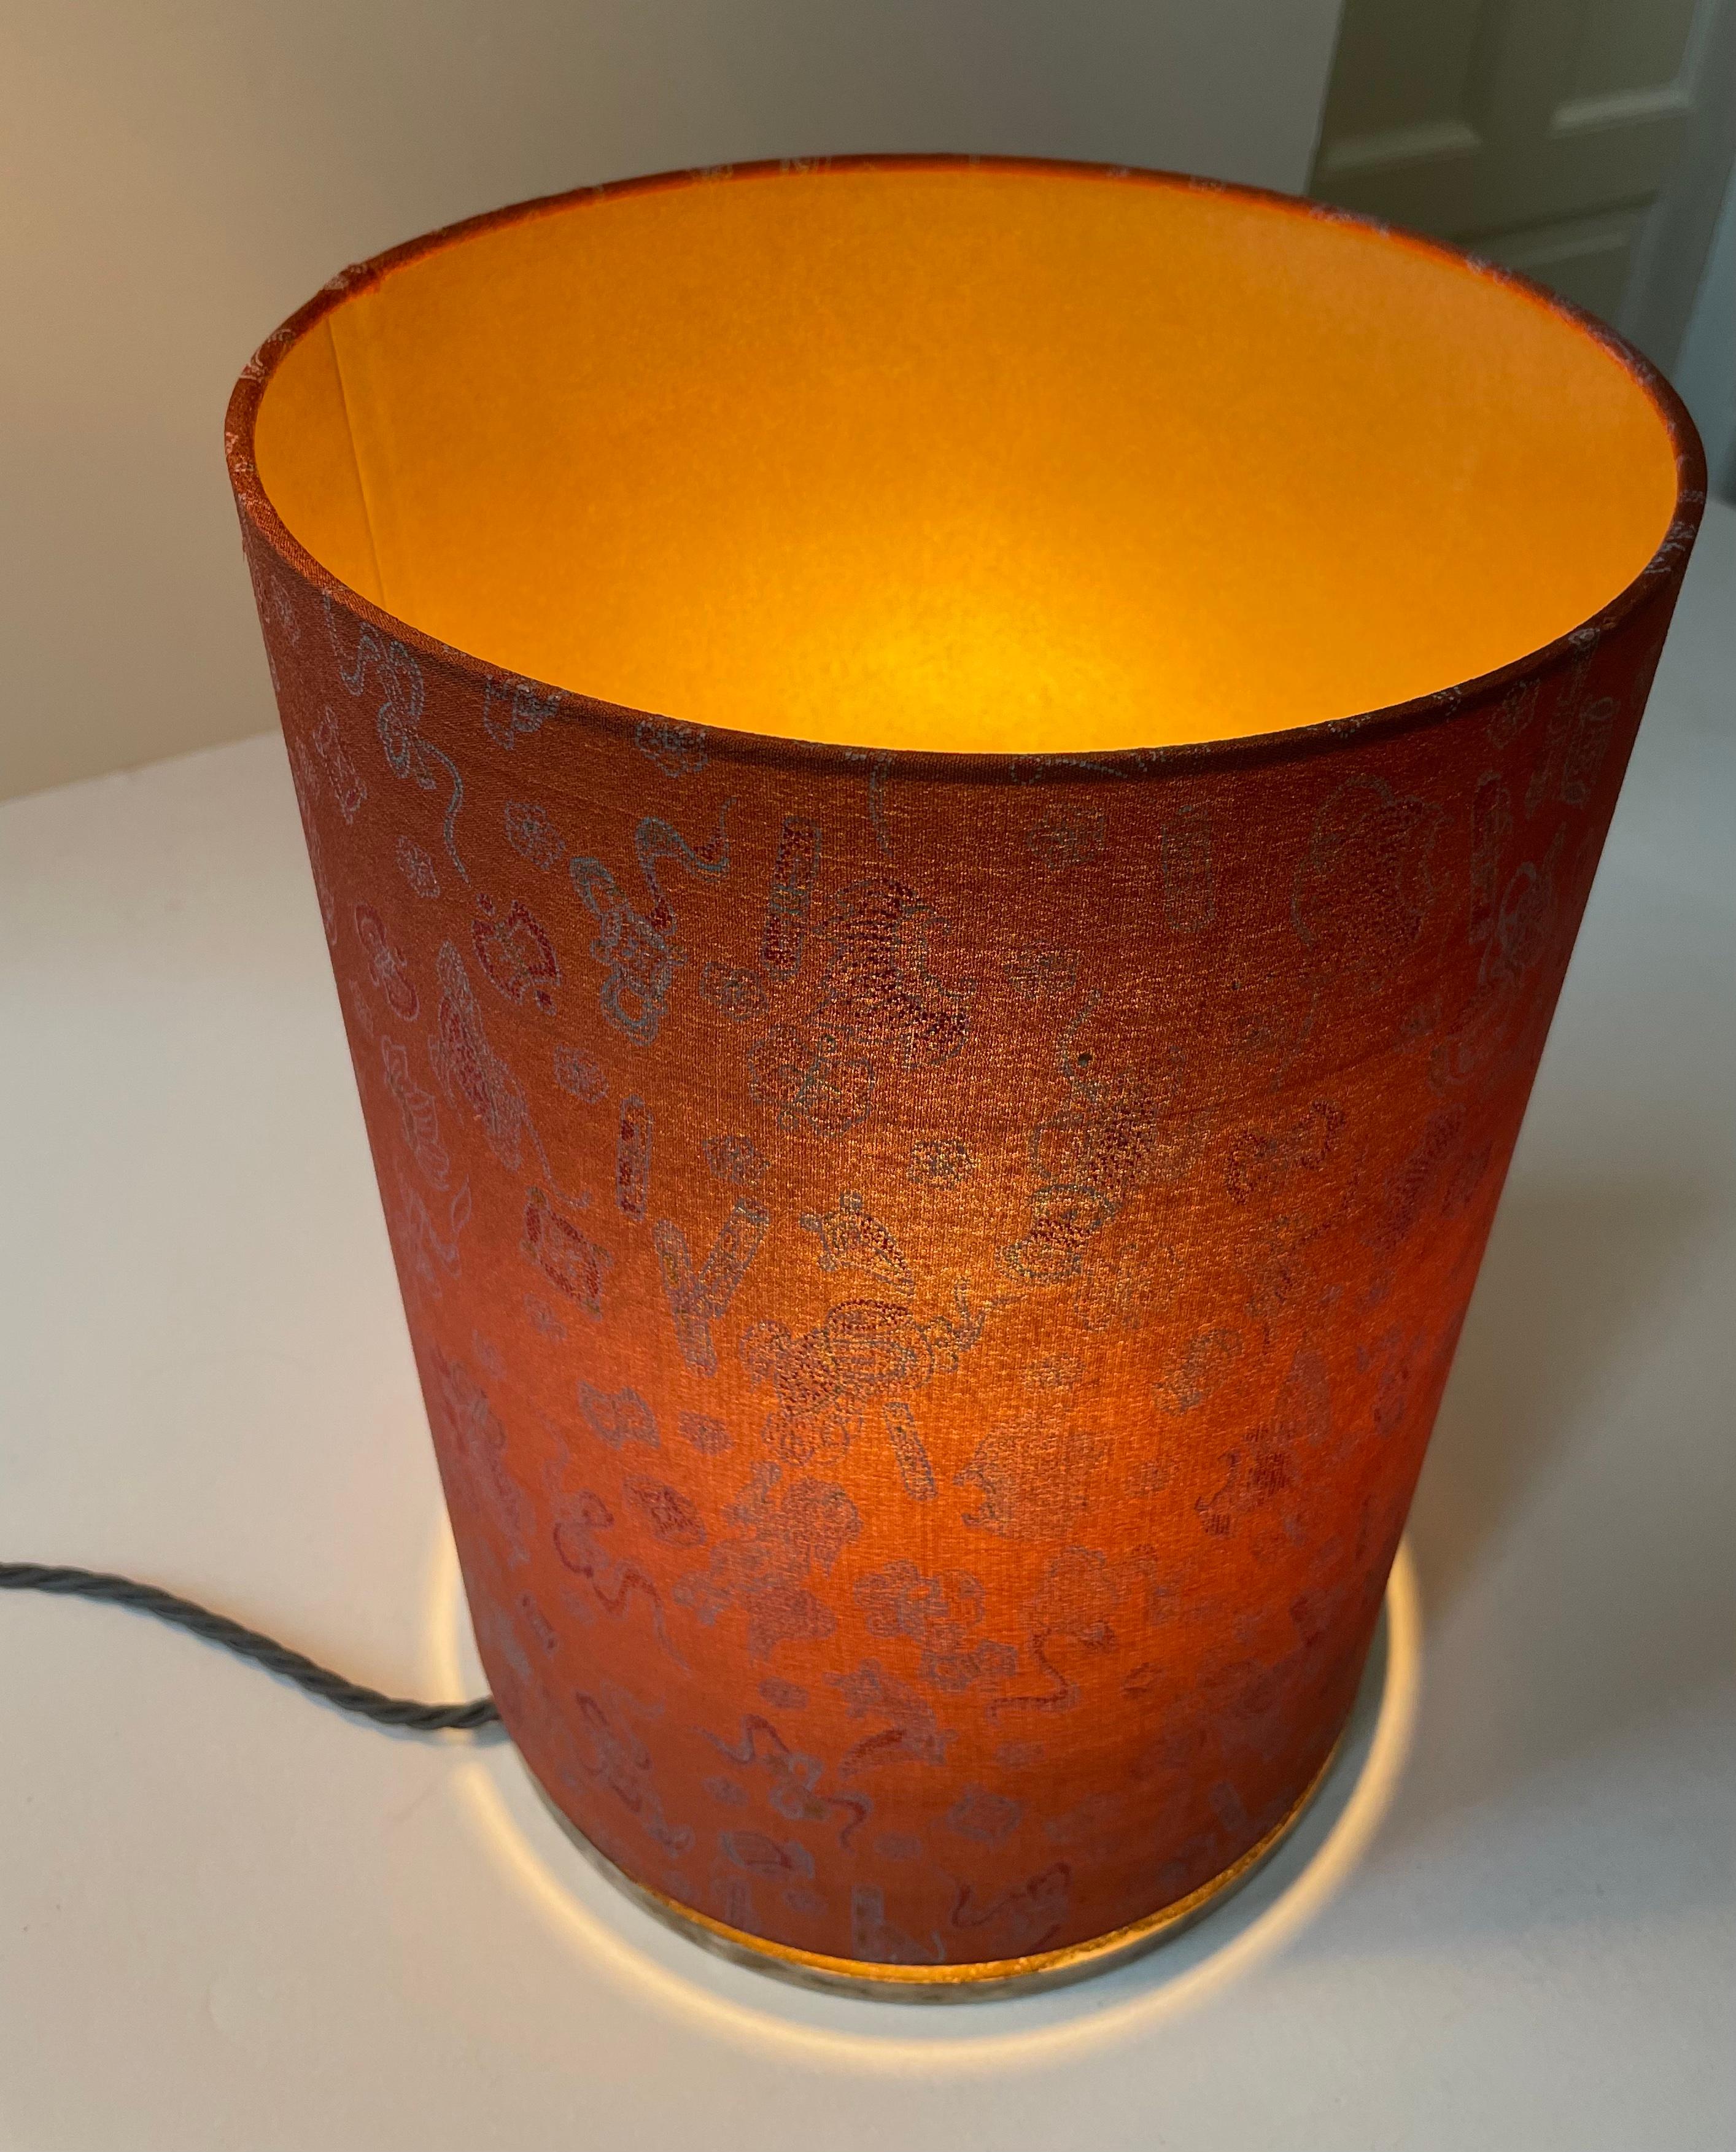 This is one of several Light Objects created by Geroma Löw x Atelier Livia
- each Object is unique.
The lampshade card backing has been coloured gold with a special technique so it allows the light to shine through.
This Lamp shade is made of a fine